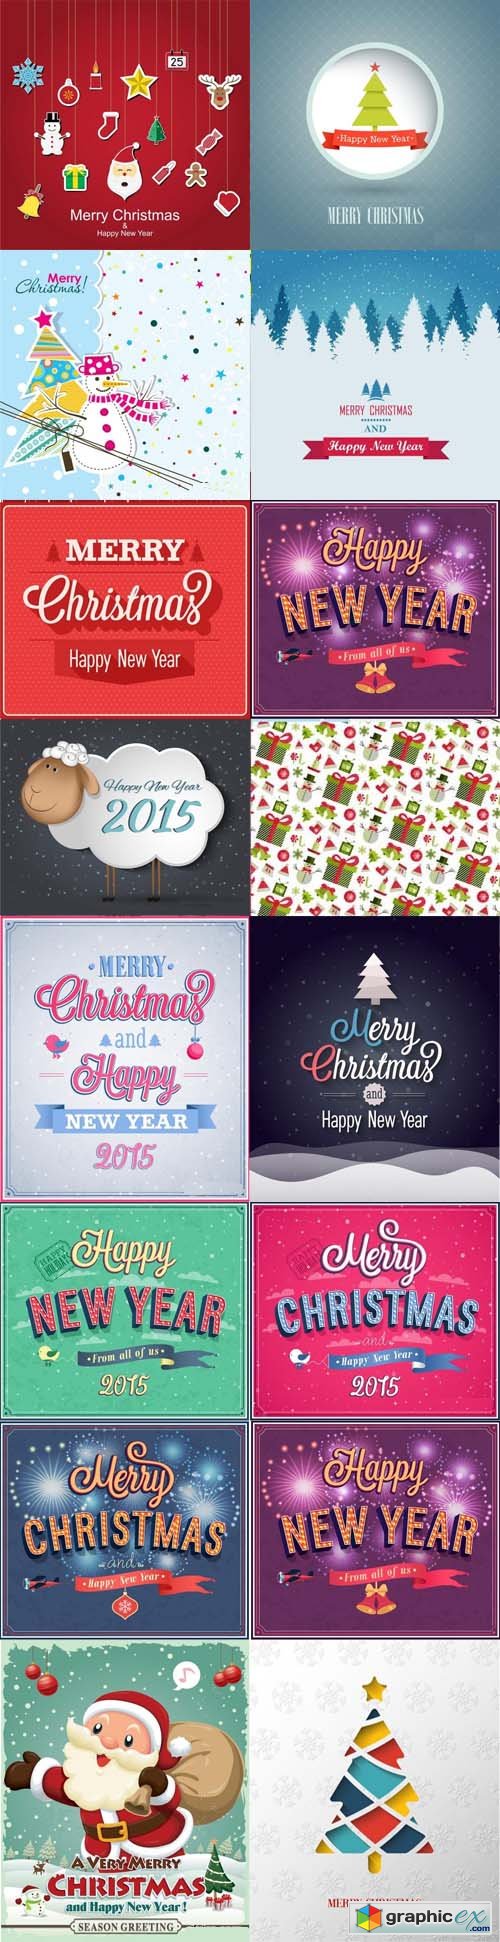 Stock Vector - Christmas Backgrounds 2